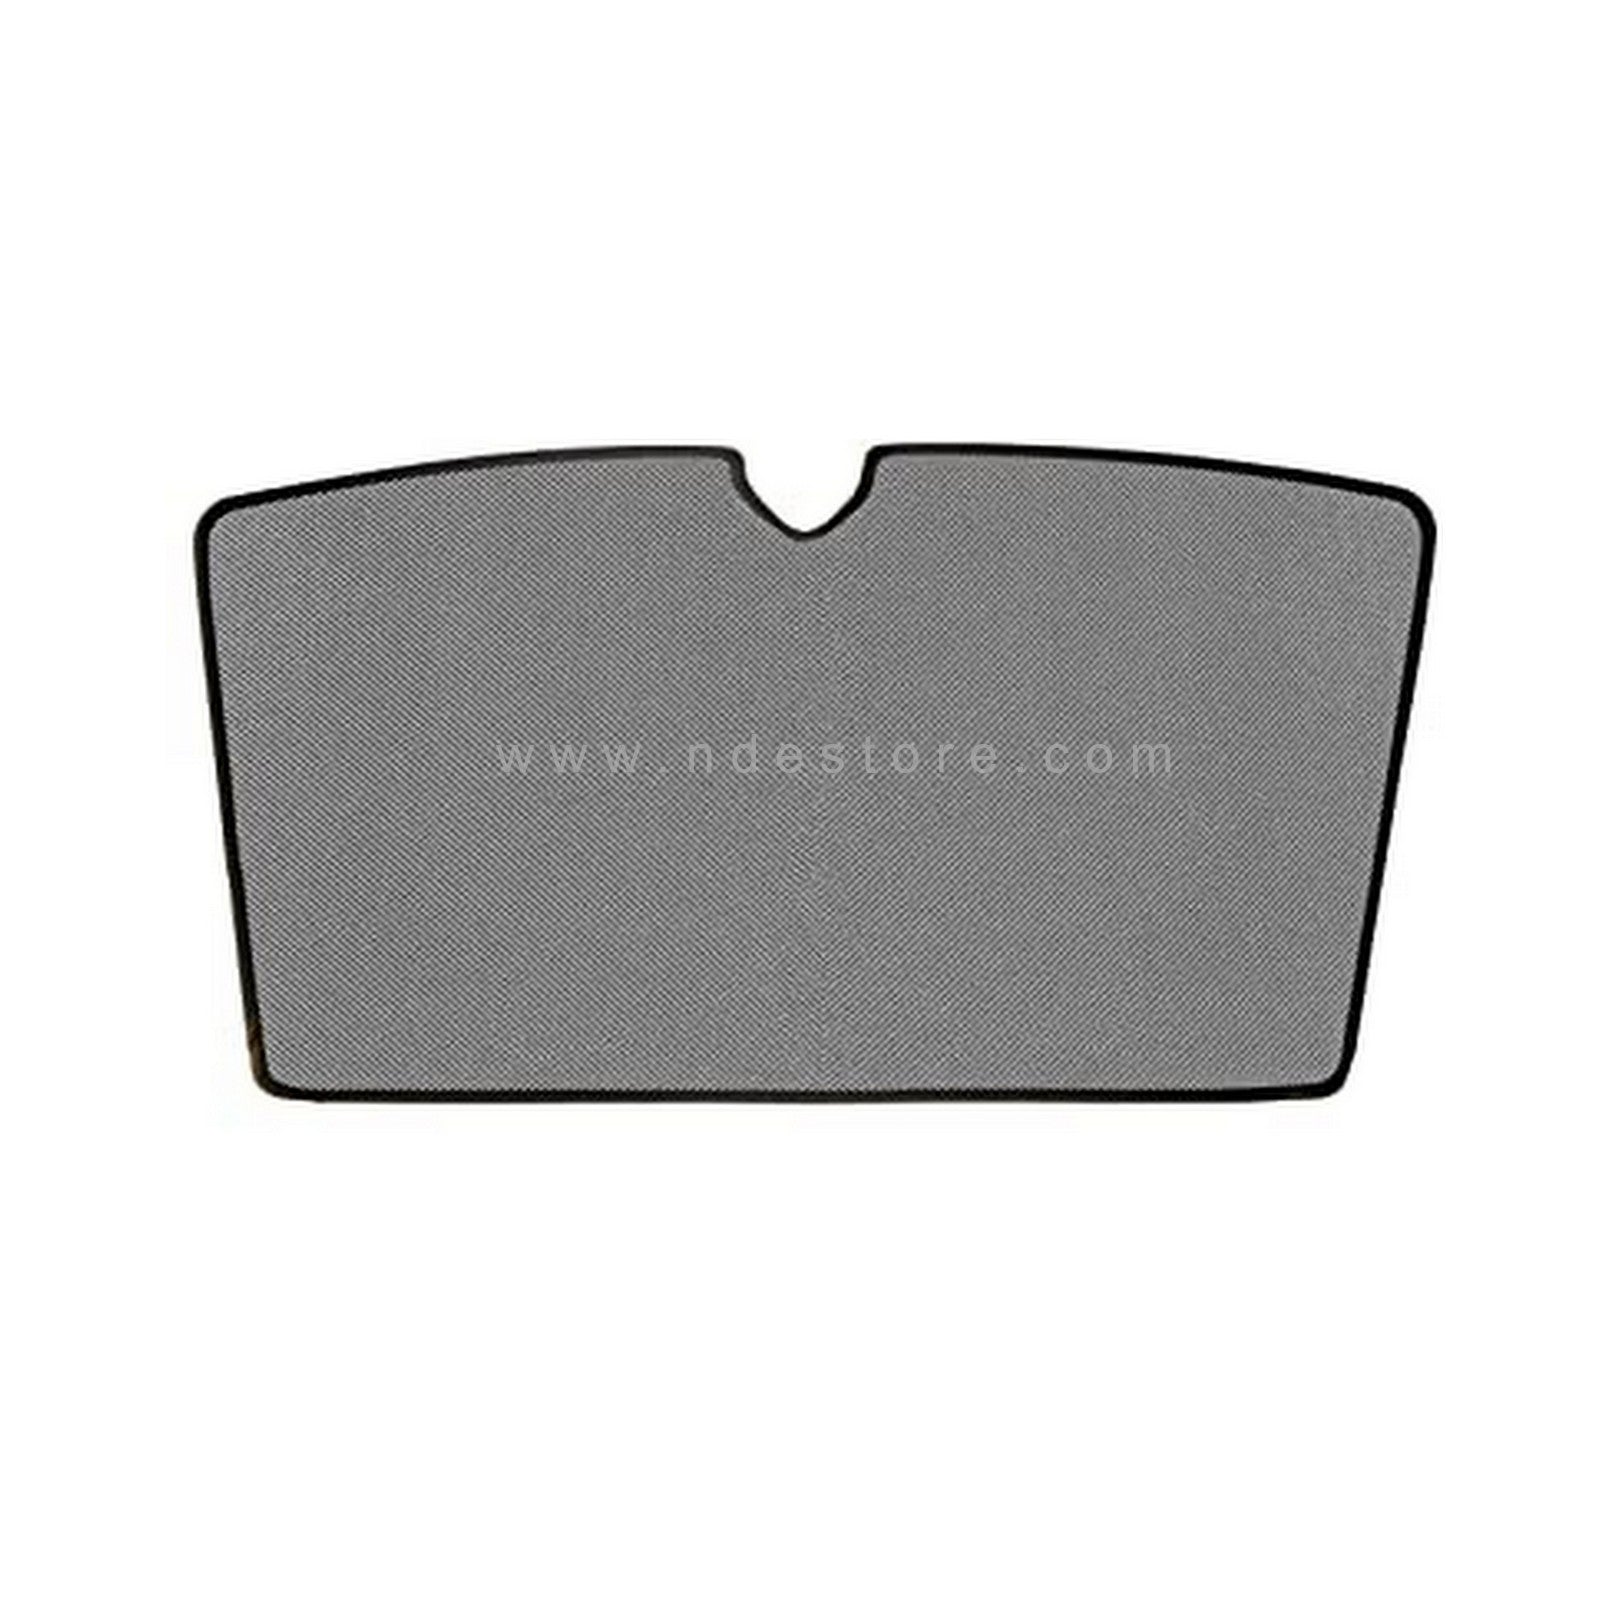 SUN SHADE REAR WINDSHIELD VIEW SCREEN FOR FOR HONDA VEZEL